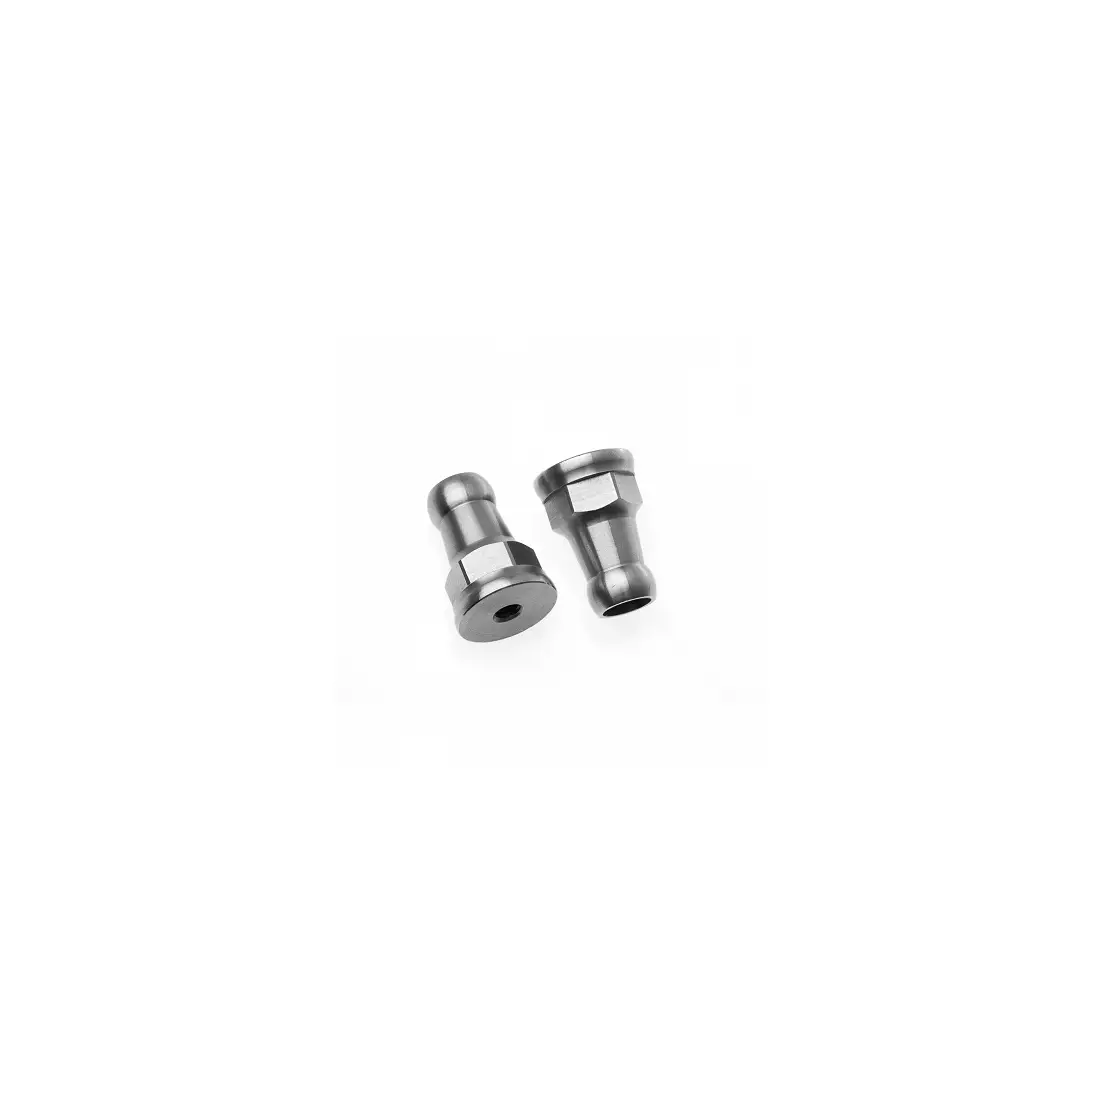 EXTRAWHEEL nuts for bicycle hubs M5x1mm E0006